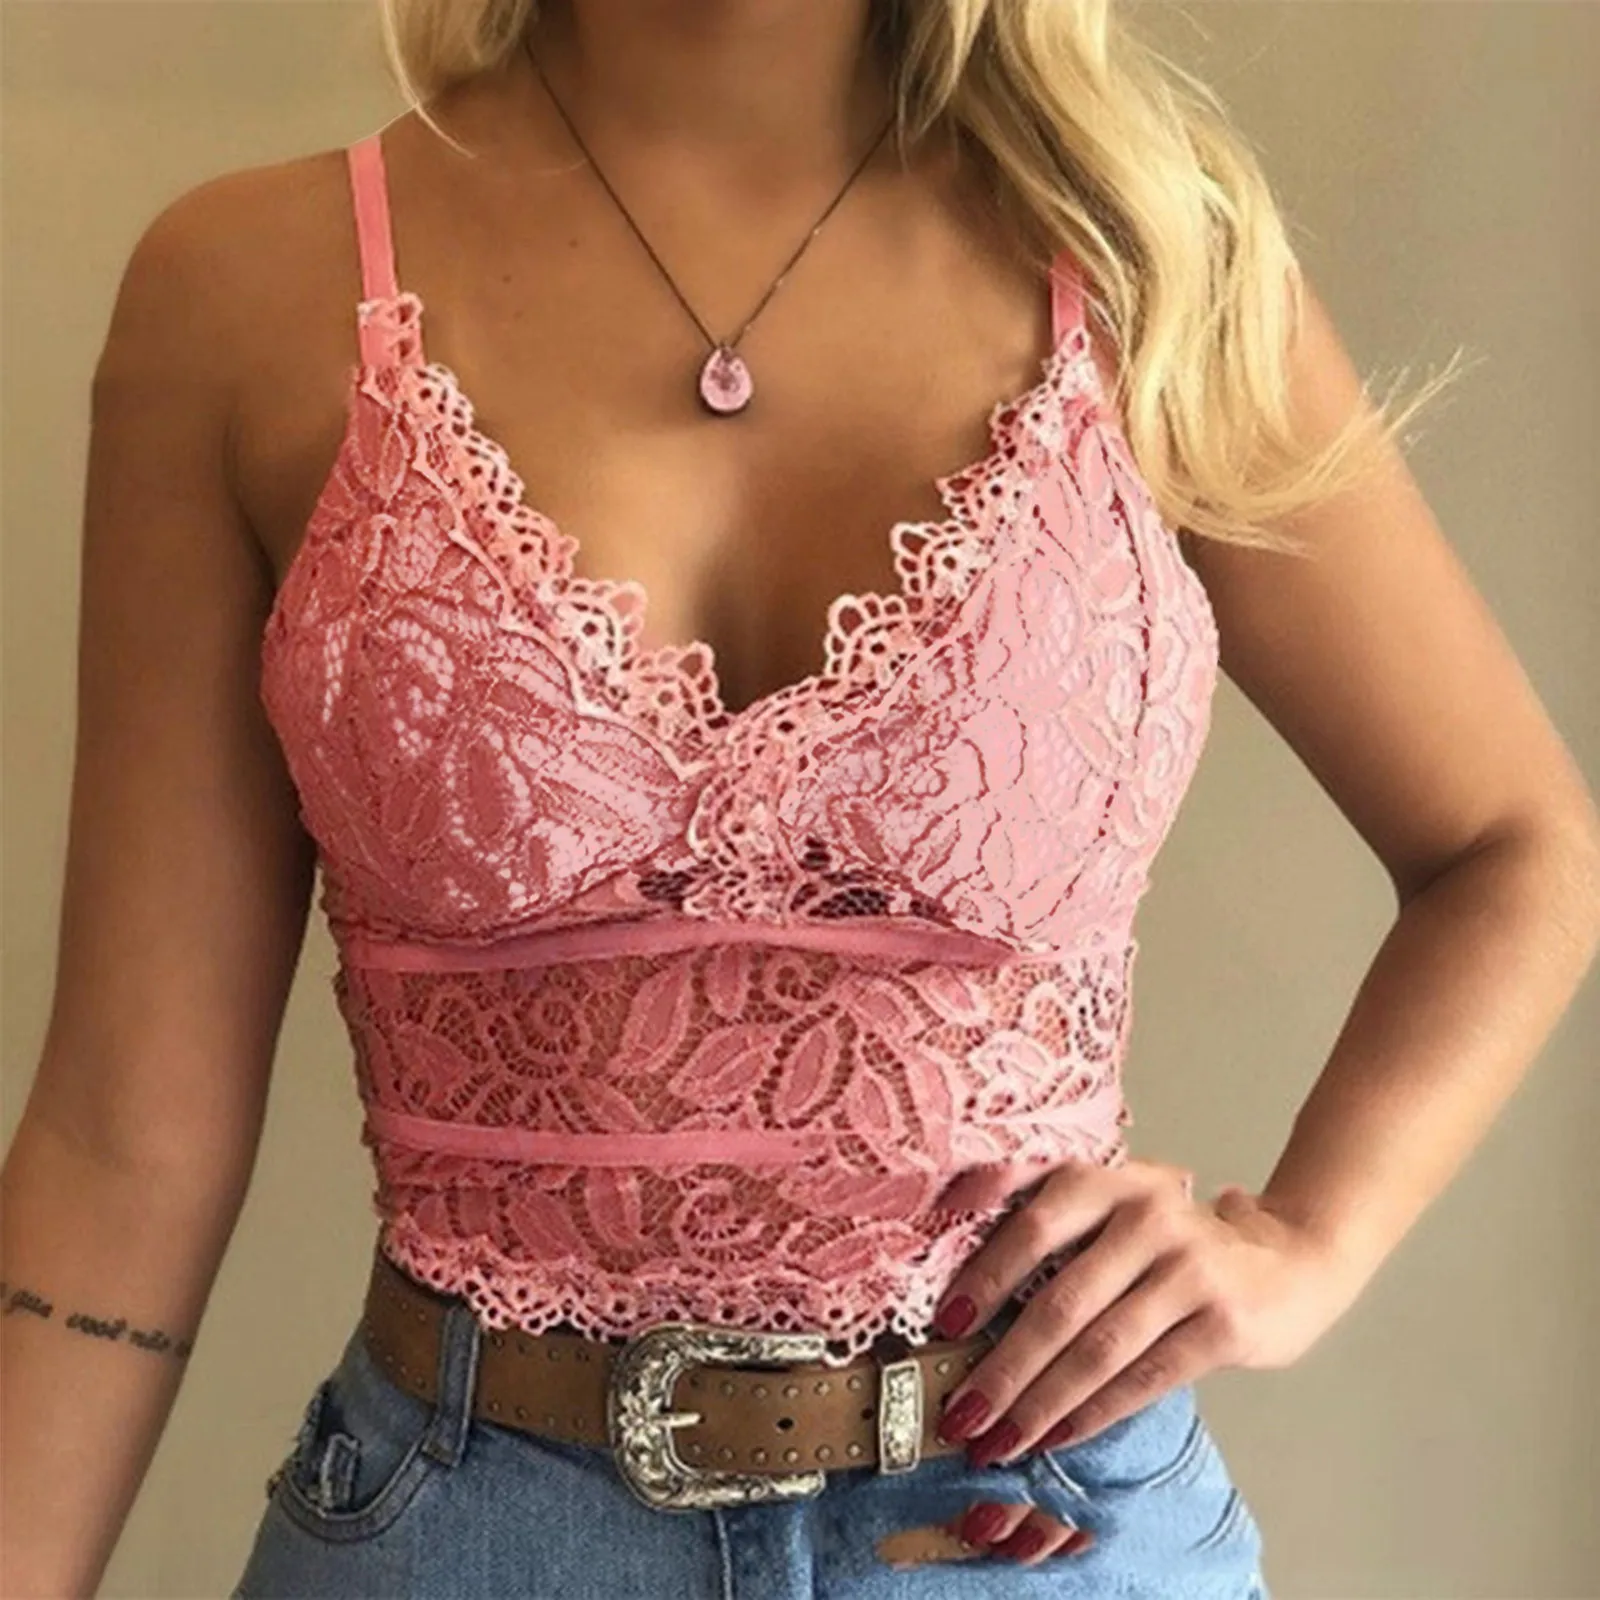 

Floral Bralette Padded Push Up Lace Bras for Women Sexy Lingerie Corset Camis Underwear Wire Free Sheer Bra Crop Tops Brassiere